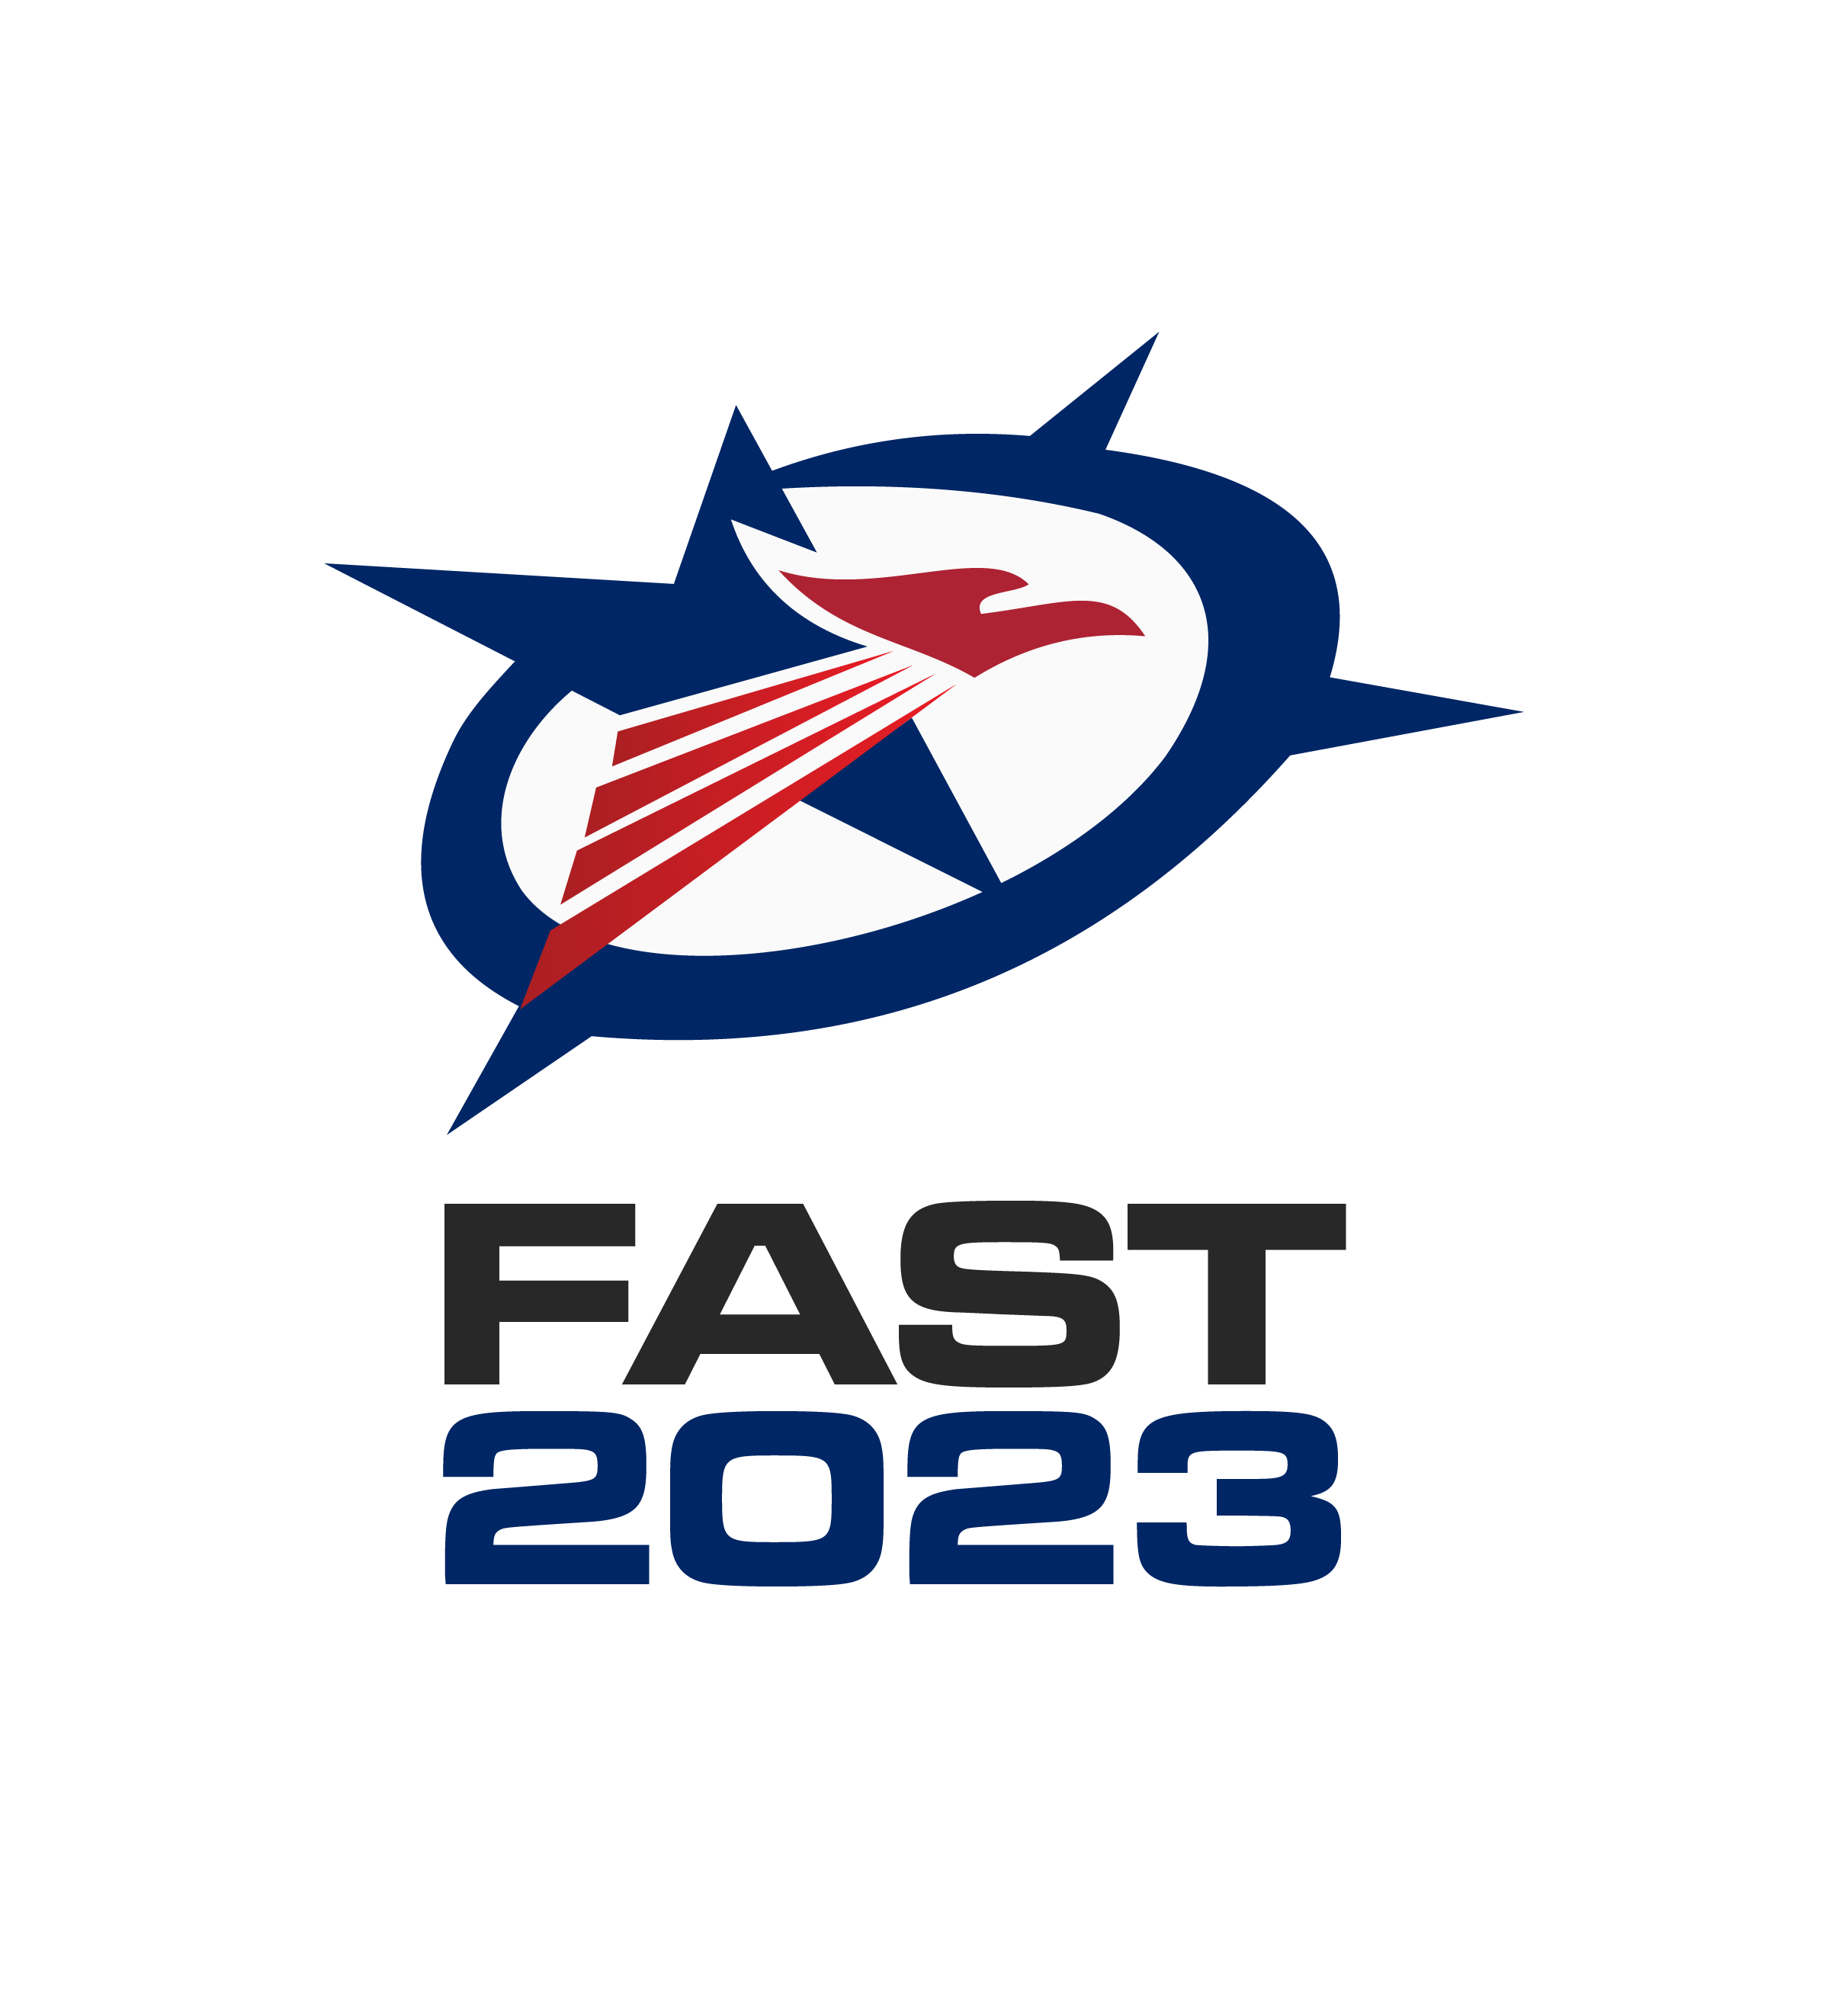 FAST 2023 Conference Series Visual Identifier